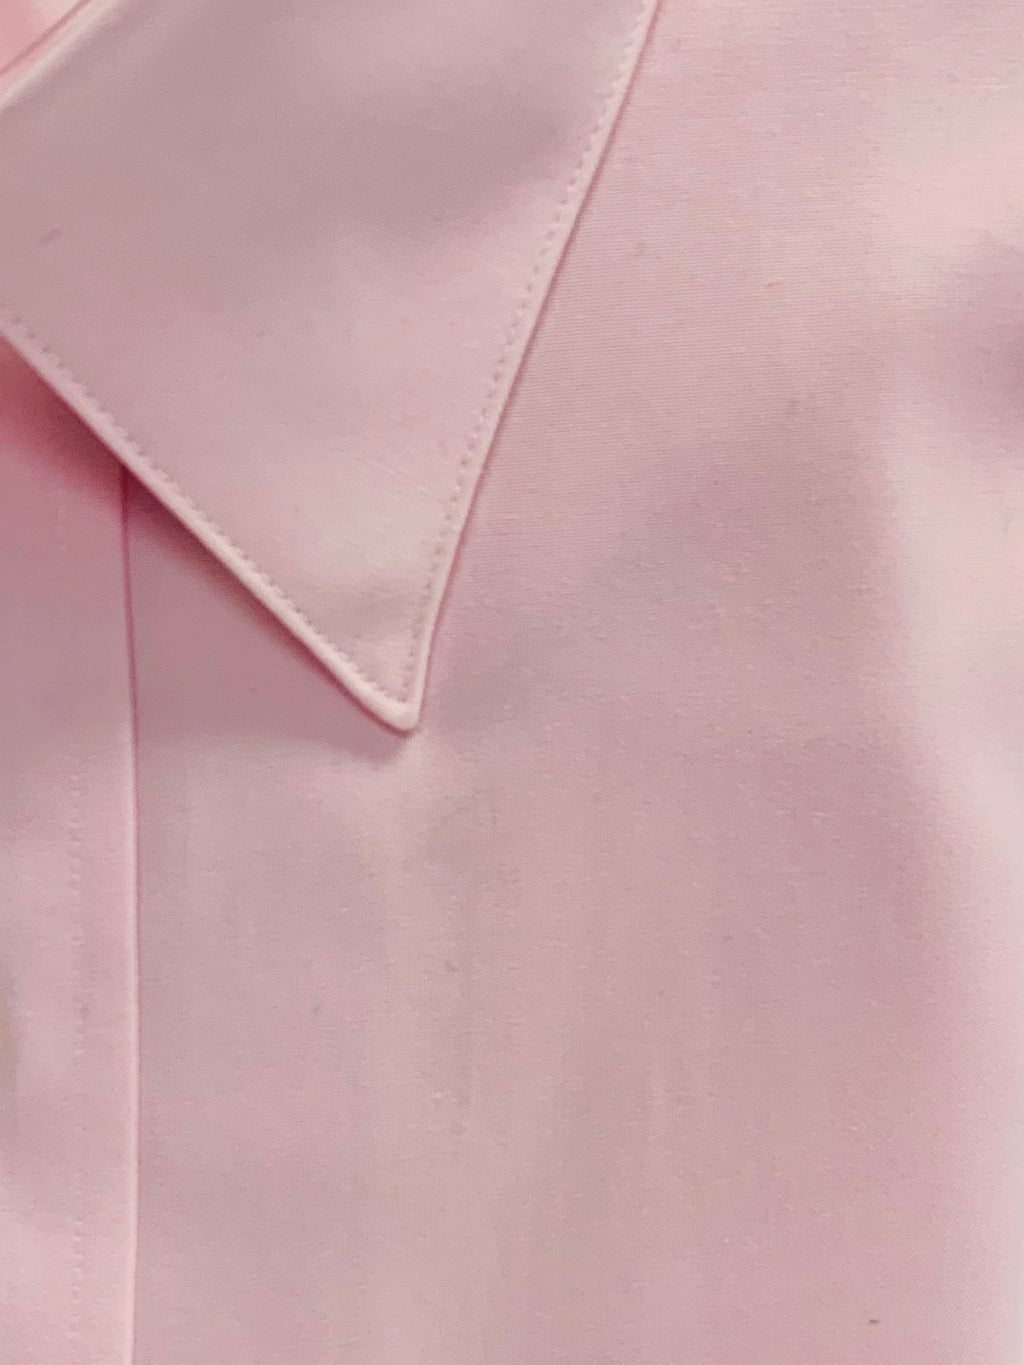 Giovanni's Modified Spread Pinpoint Dress Shirt - Pink-60